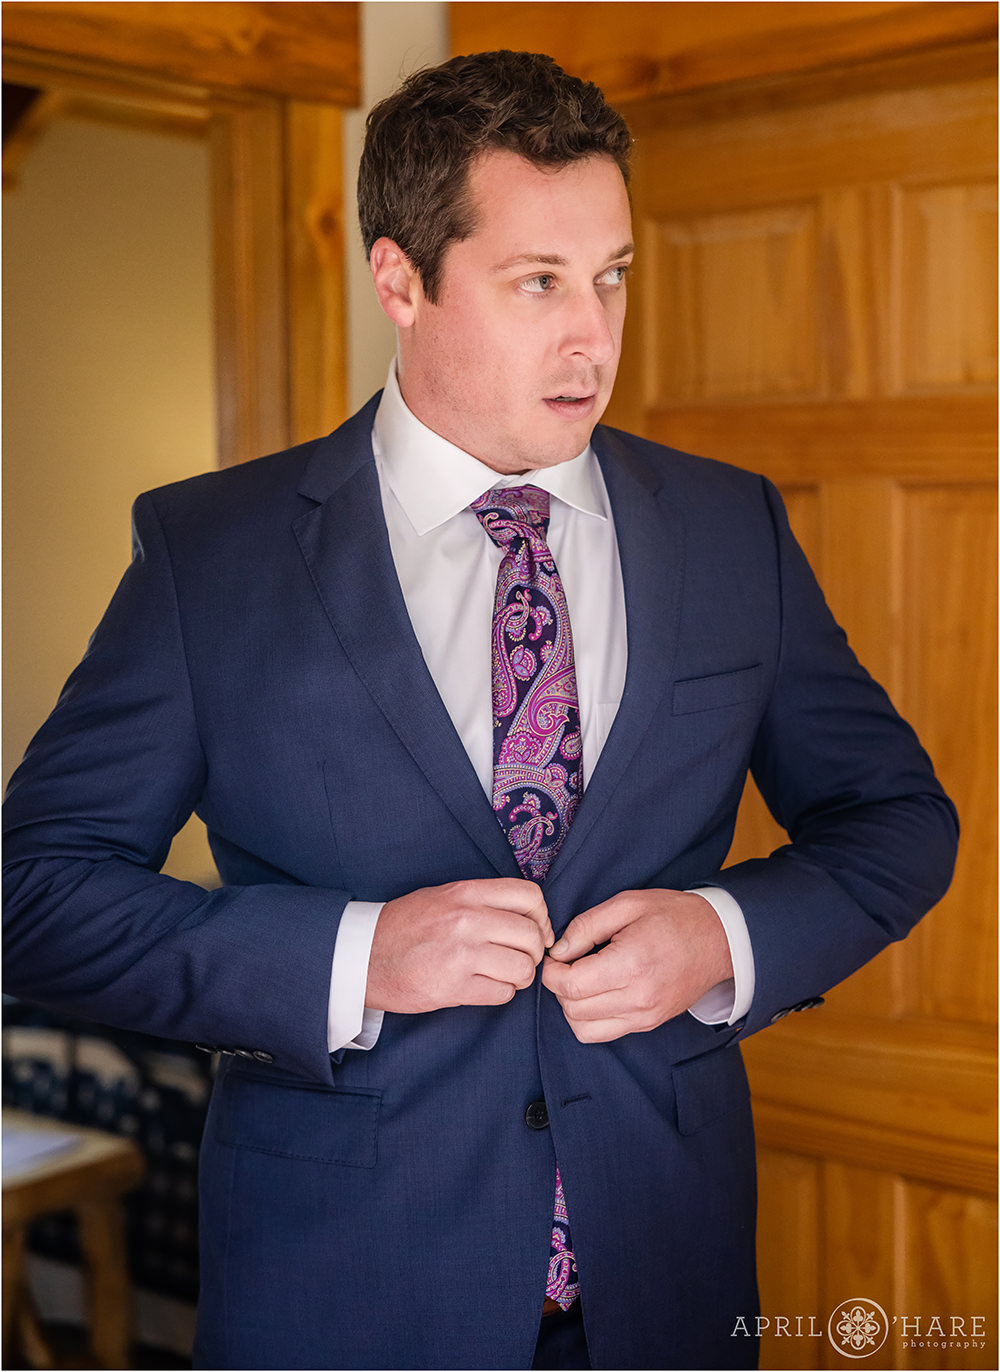 Tall groom with dark hair buttons his navy blue suit jacket inside the Estes Park Condos in Colorado